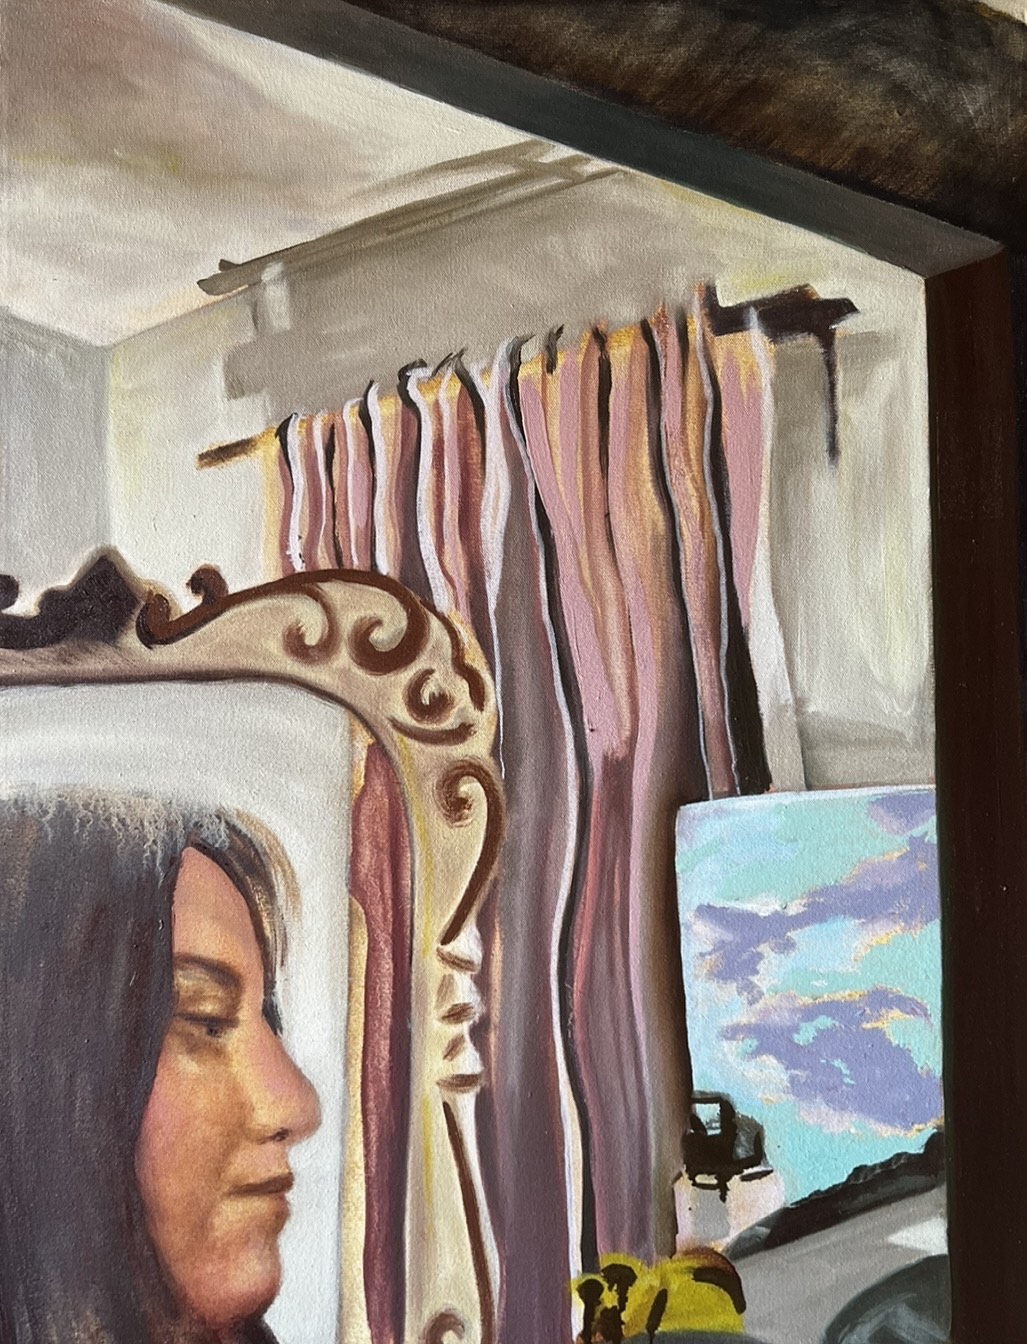 A woman's face appears in a mirror in the bottom left corner of a room